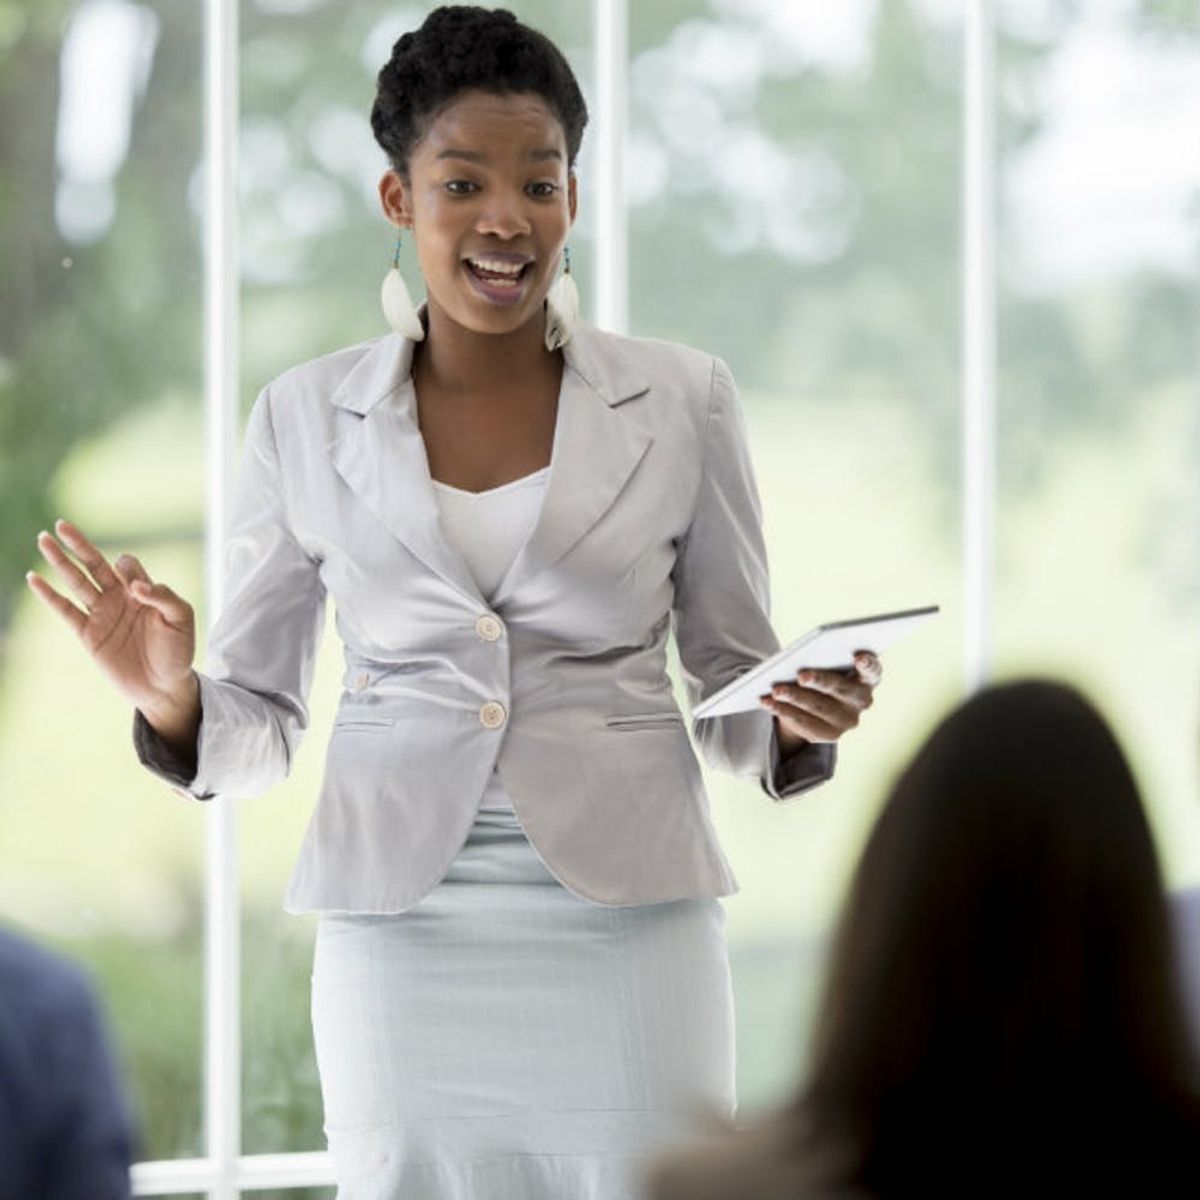 5 Expert Tips for Getting Over Your Fear of Public Speaking